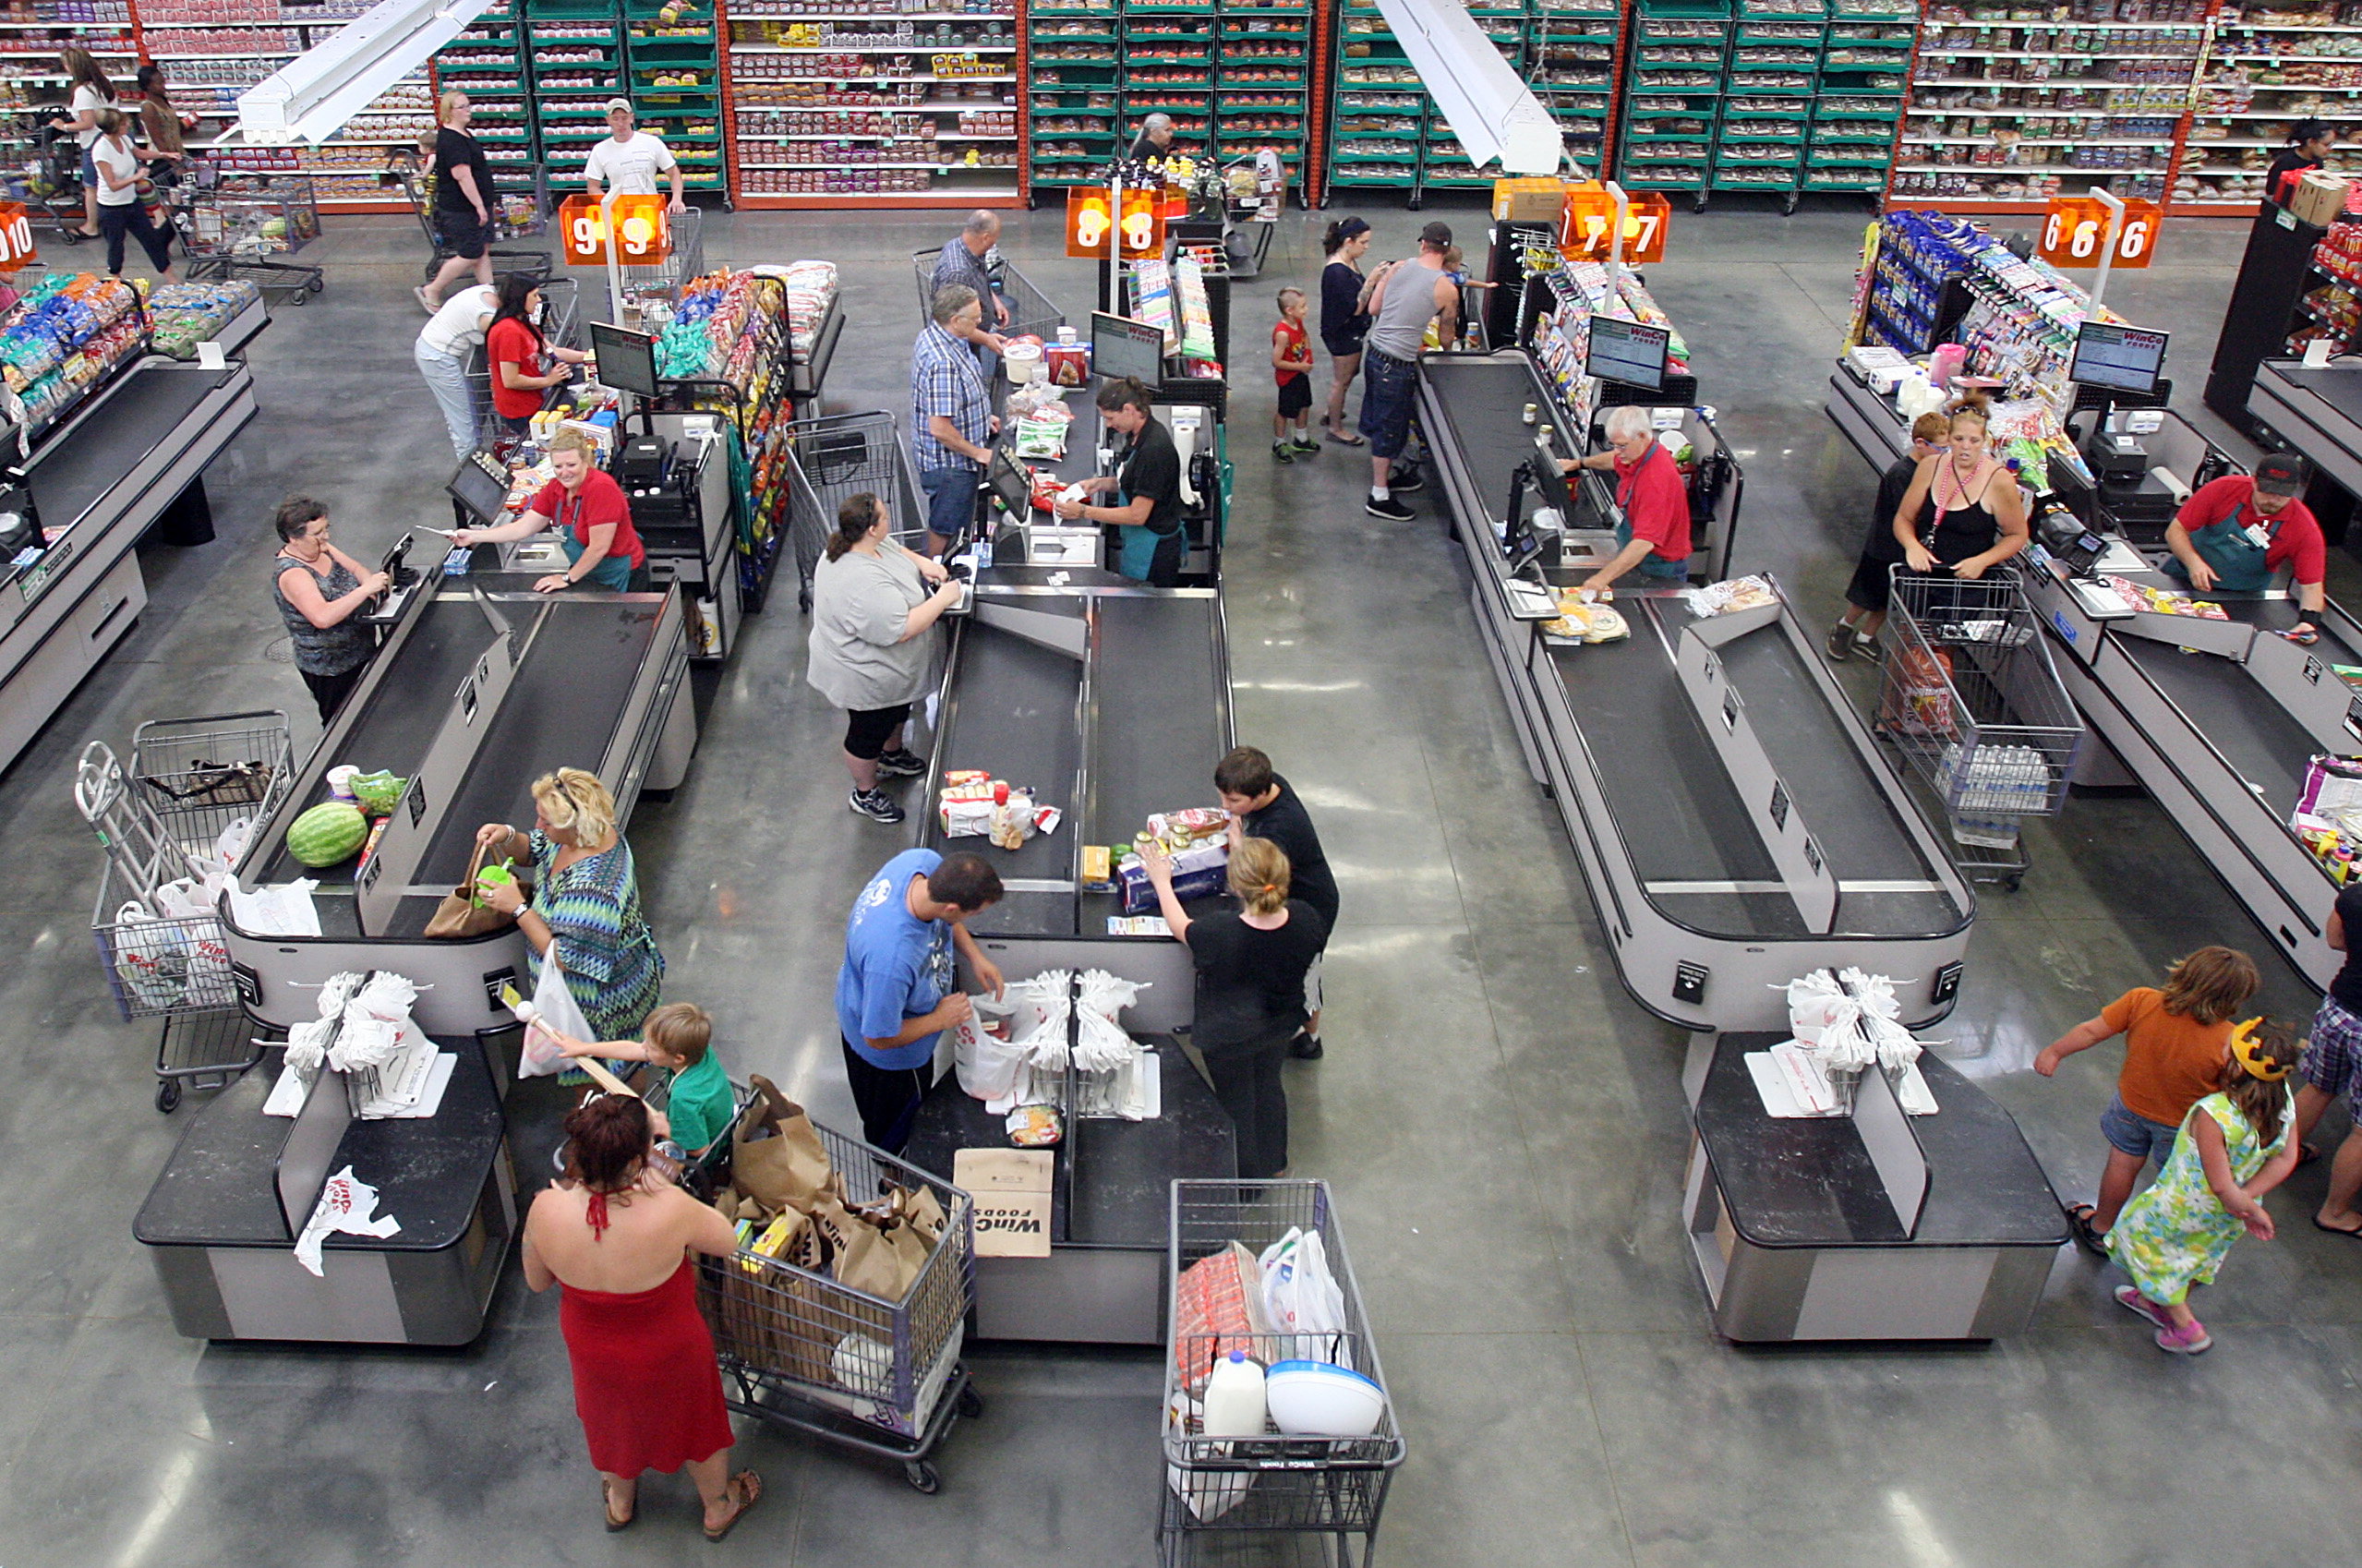 Customers bag their own groceries at checkout counters at WinCo Foods on Fairview Avenue in Boise, Idaho, on July 1, 2013 (Joe Jaszewski / The Idaho Statesman / AP)